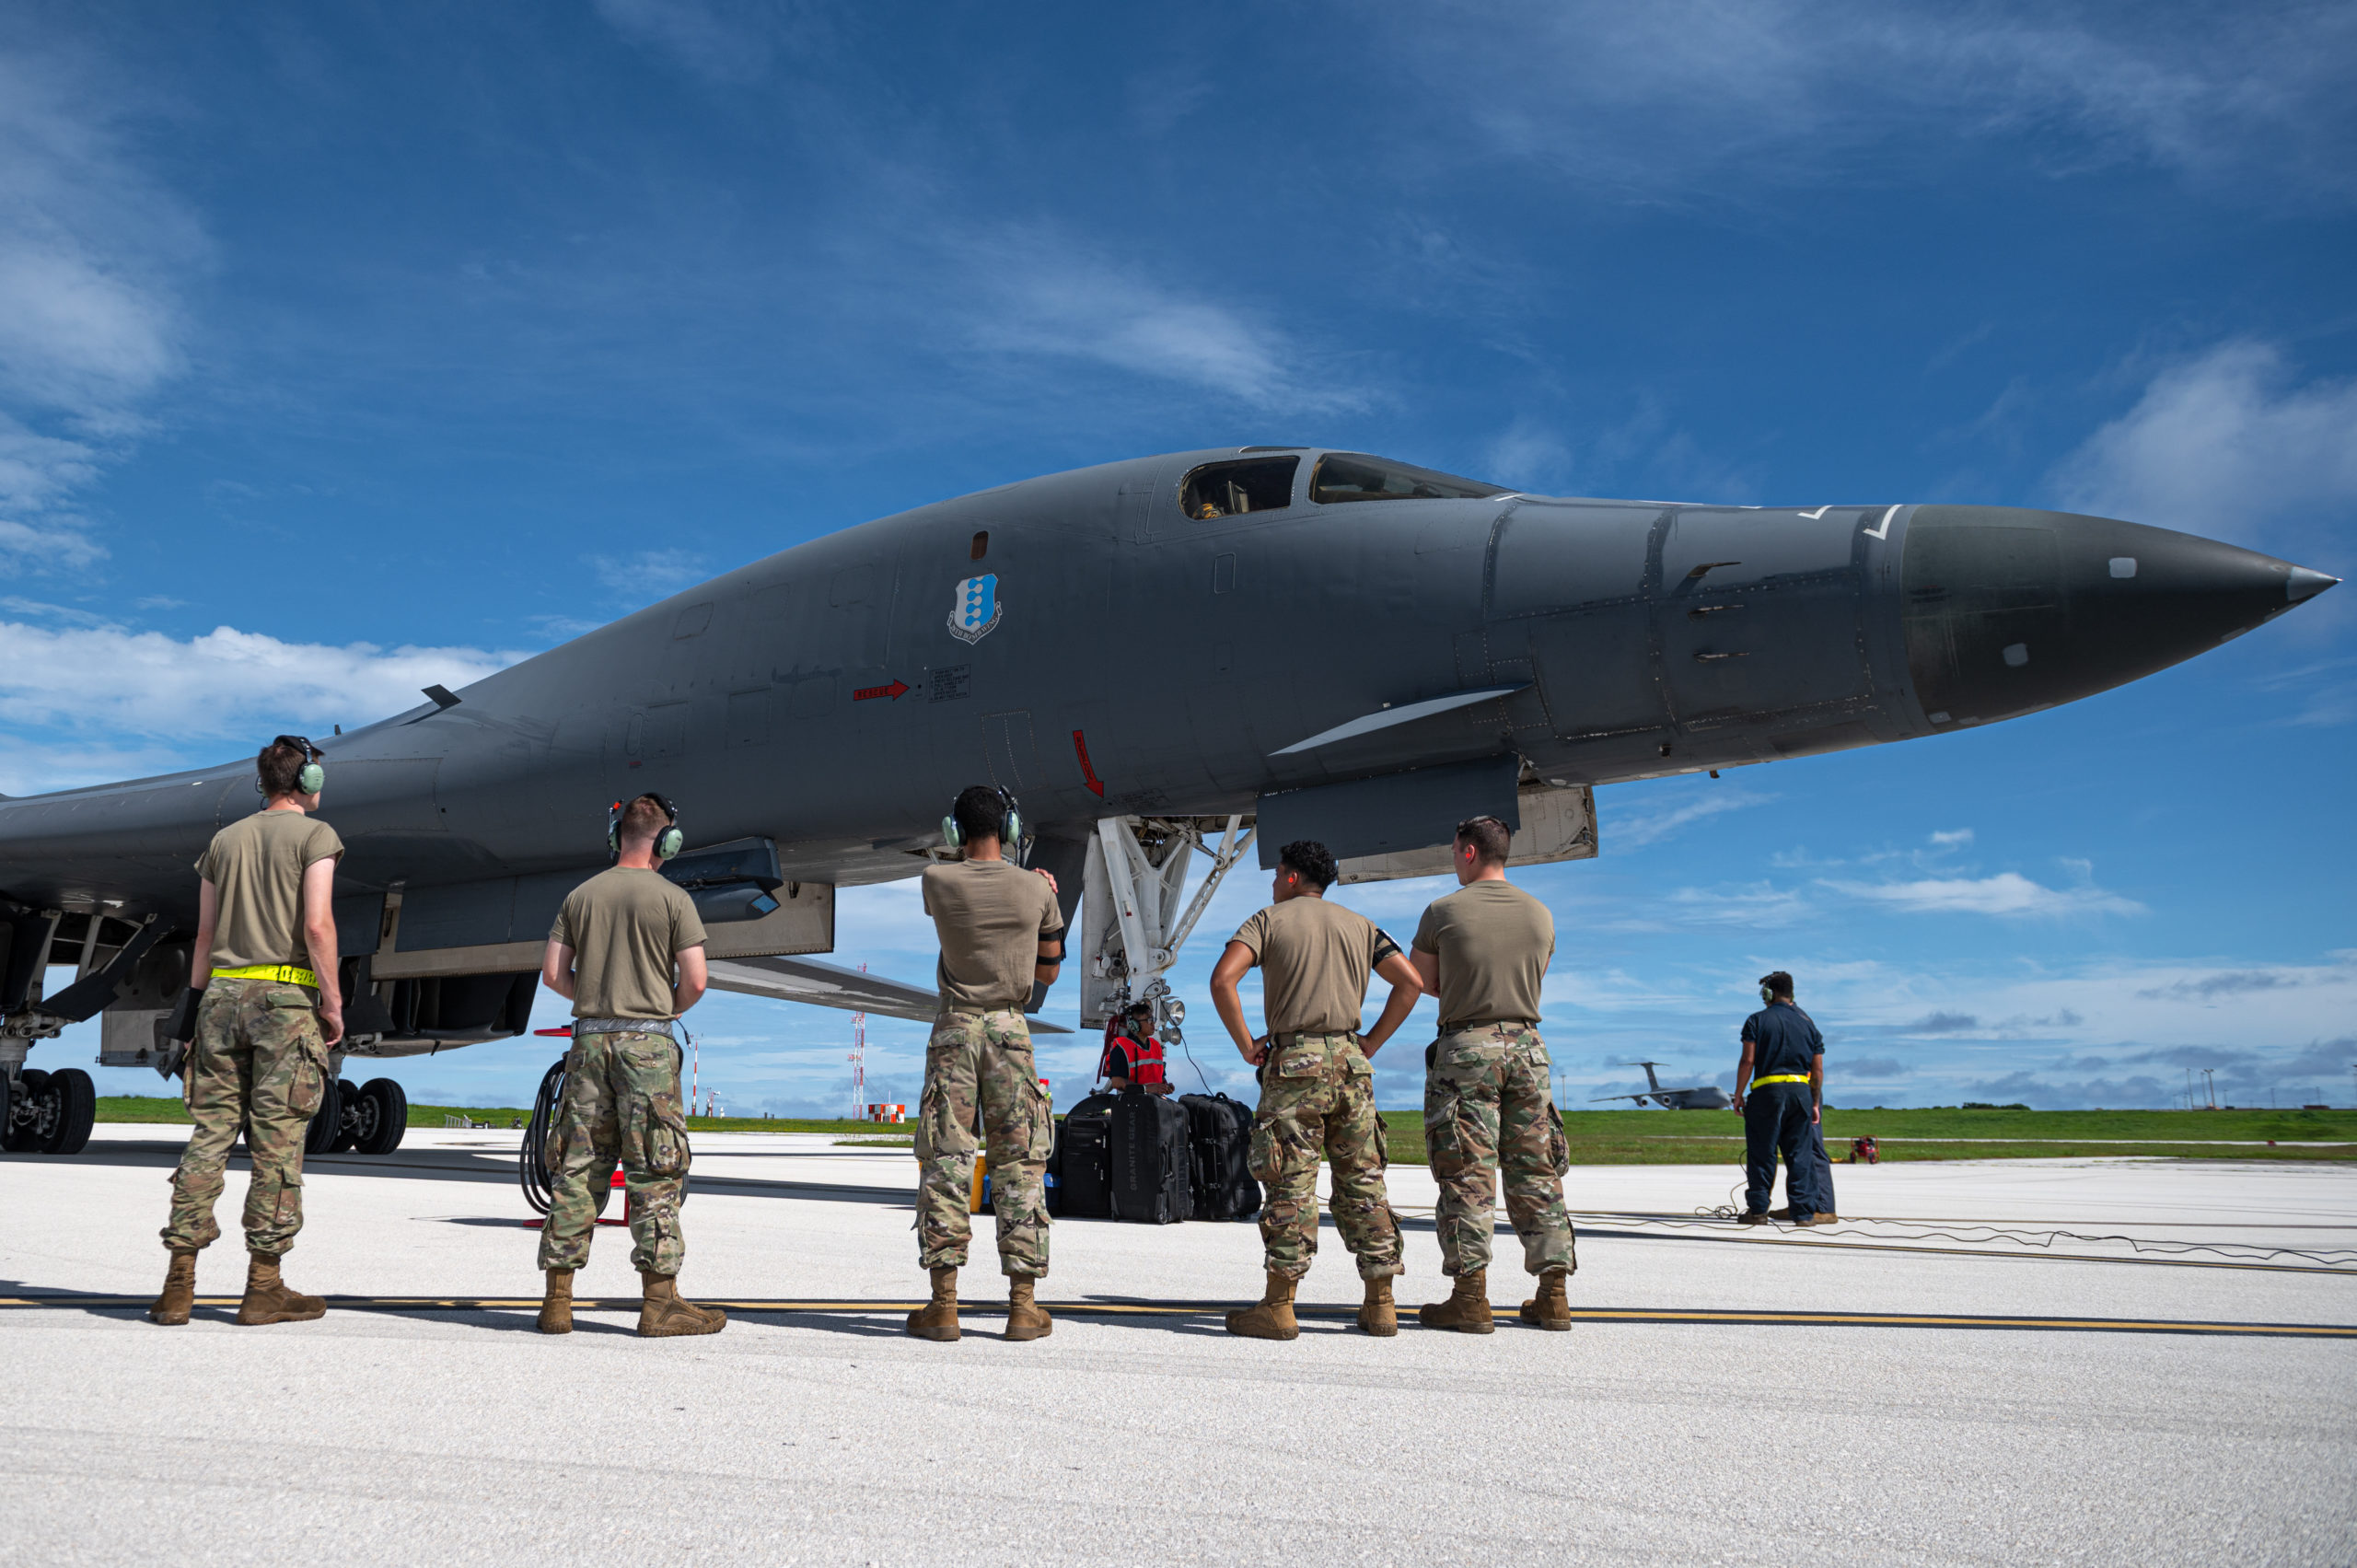 B-1s Land in Guam to Start Bomber Task Force in Indo-Pacific